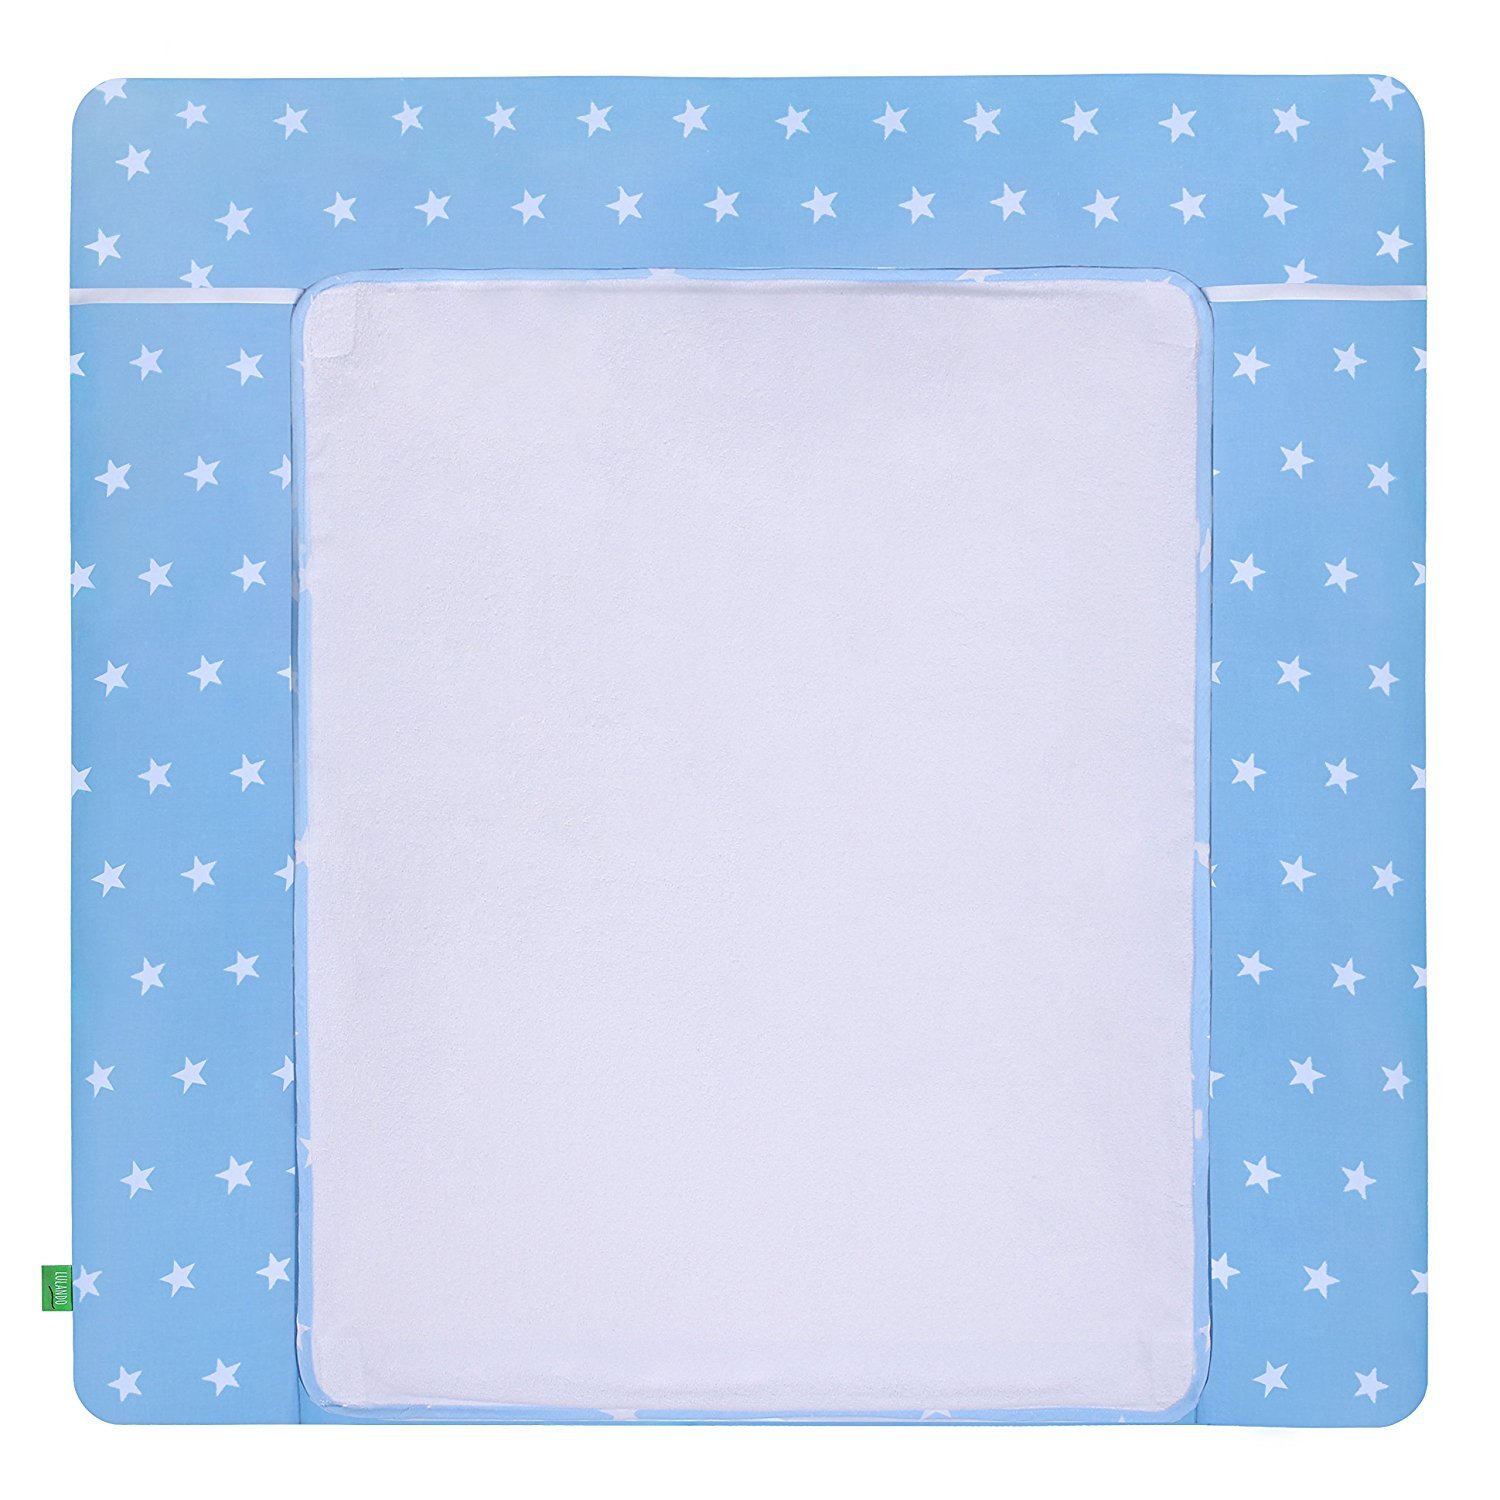 Lulando Changing Mat with 2 Removable Waterproof Covers - Outer Material 100% Cotton - Suitable for the IKEA Malm or Hemnes Units 75x85 cm